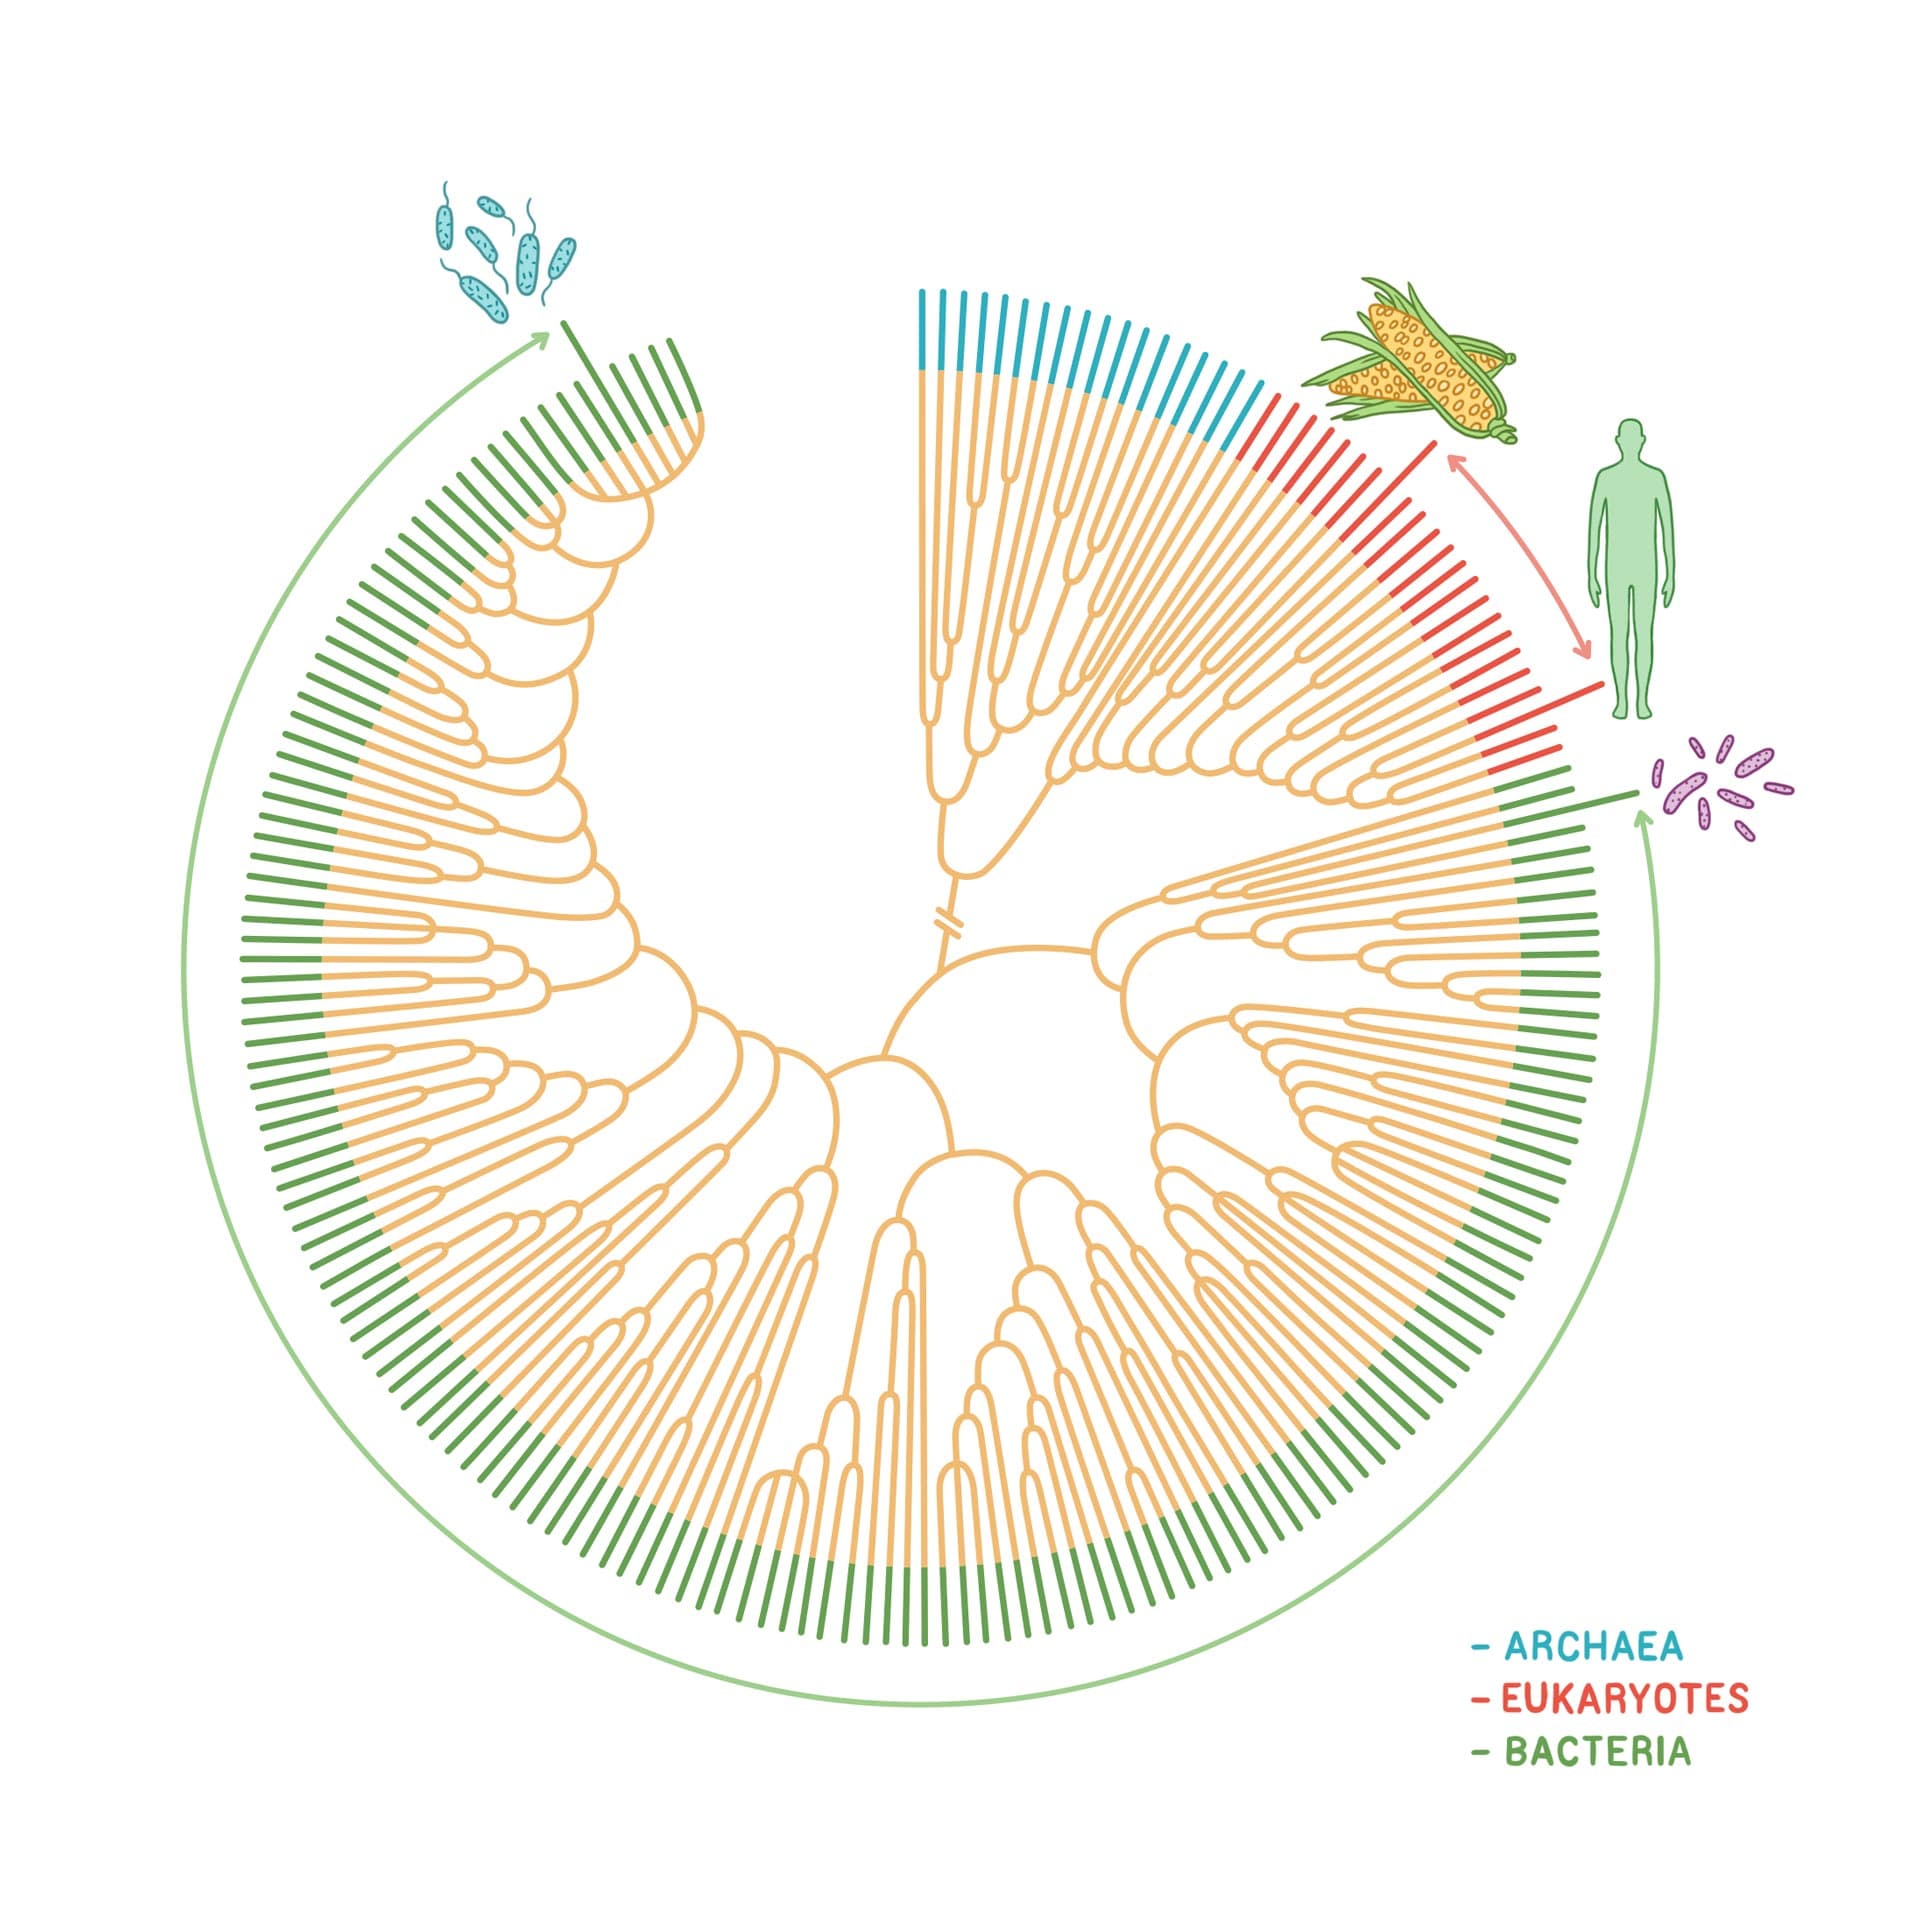 Tree of life showing the distance between a human, corn and bacteria